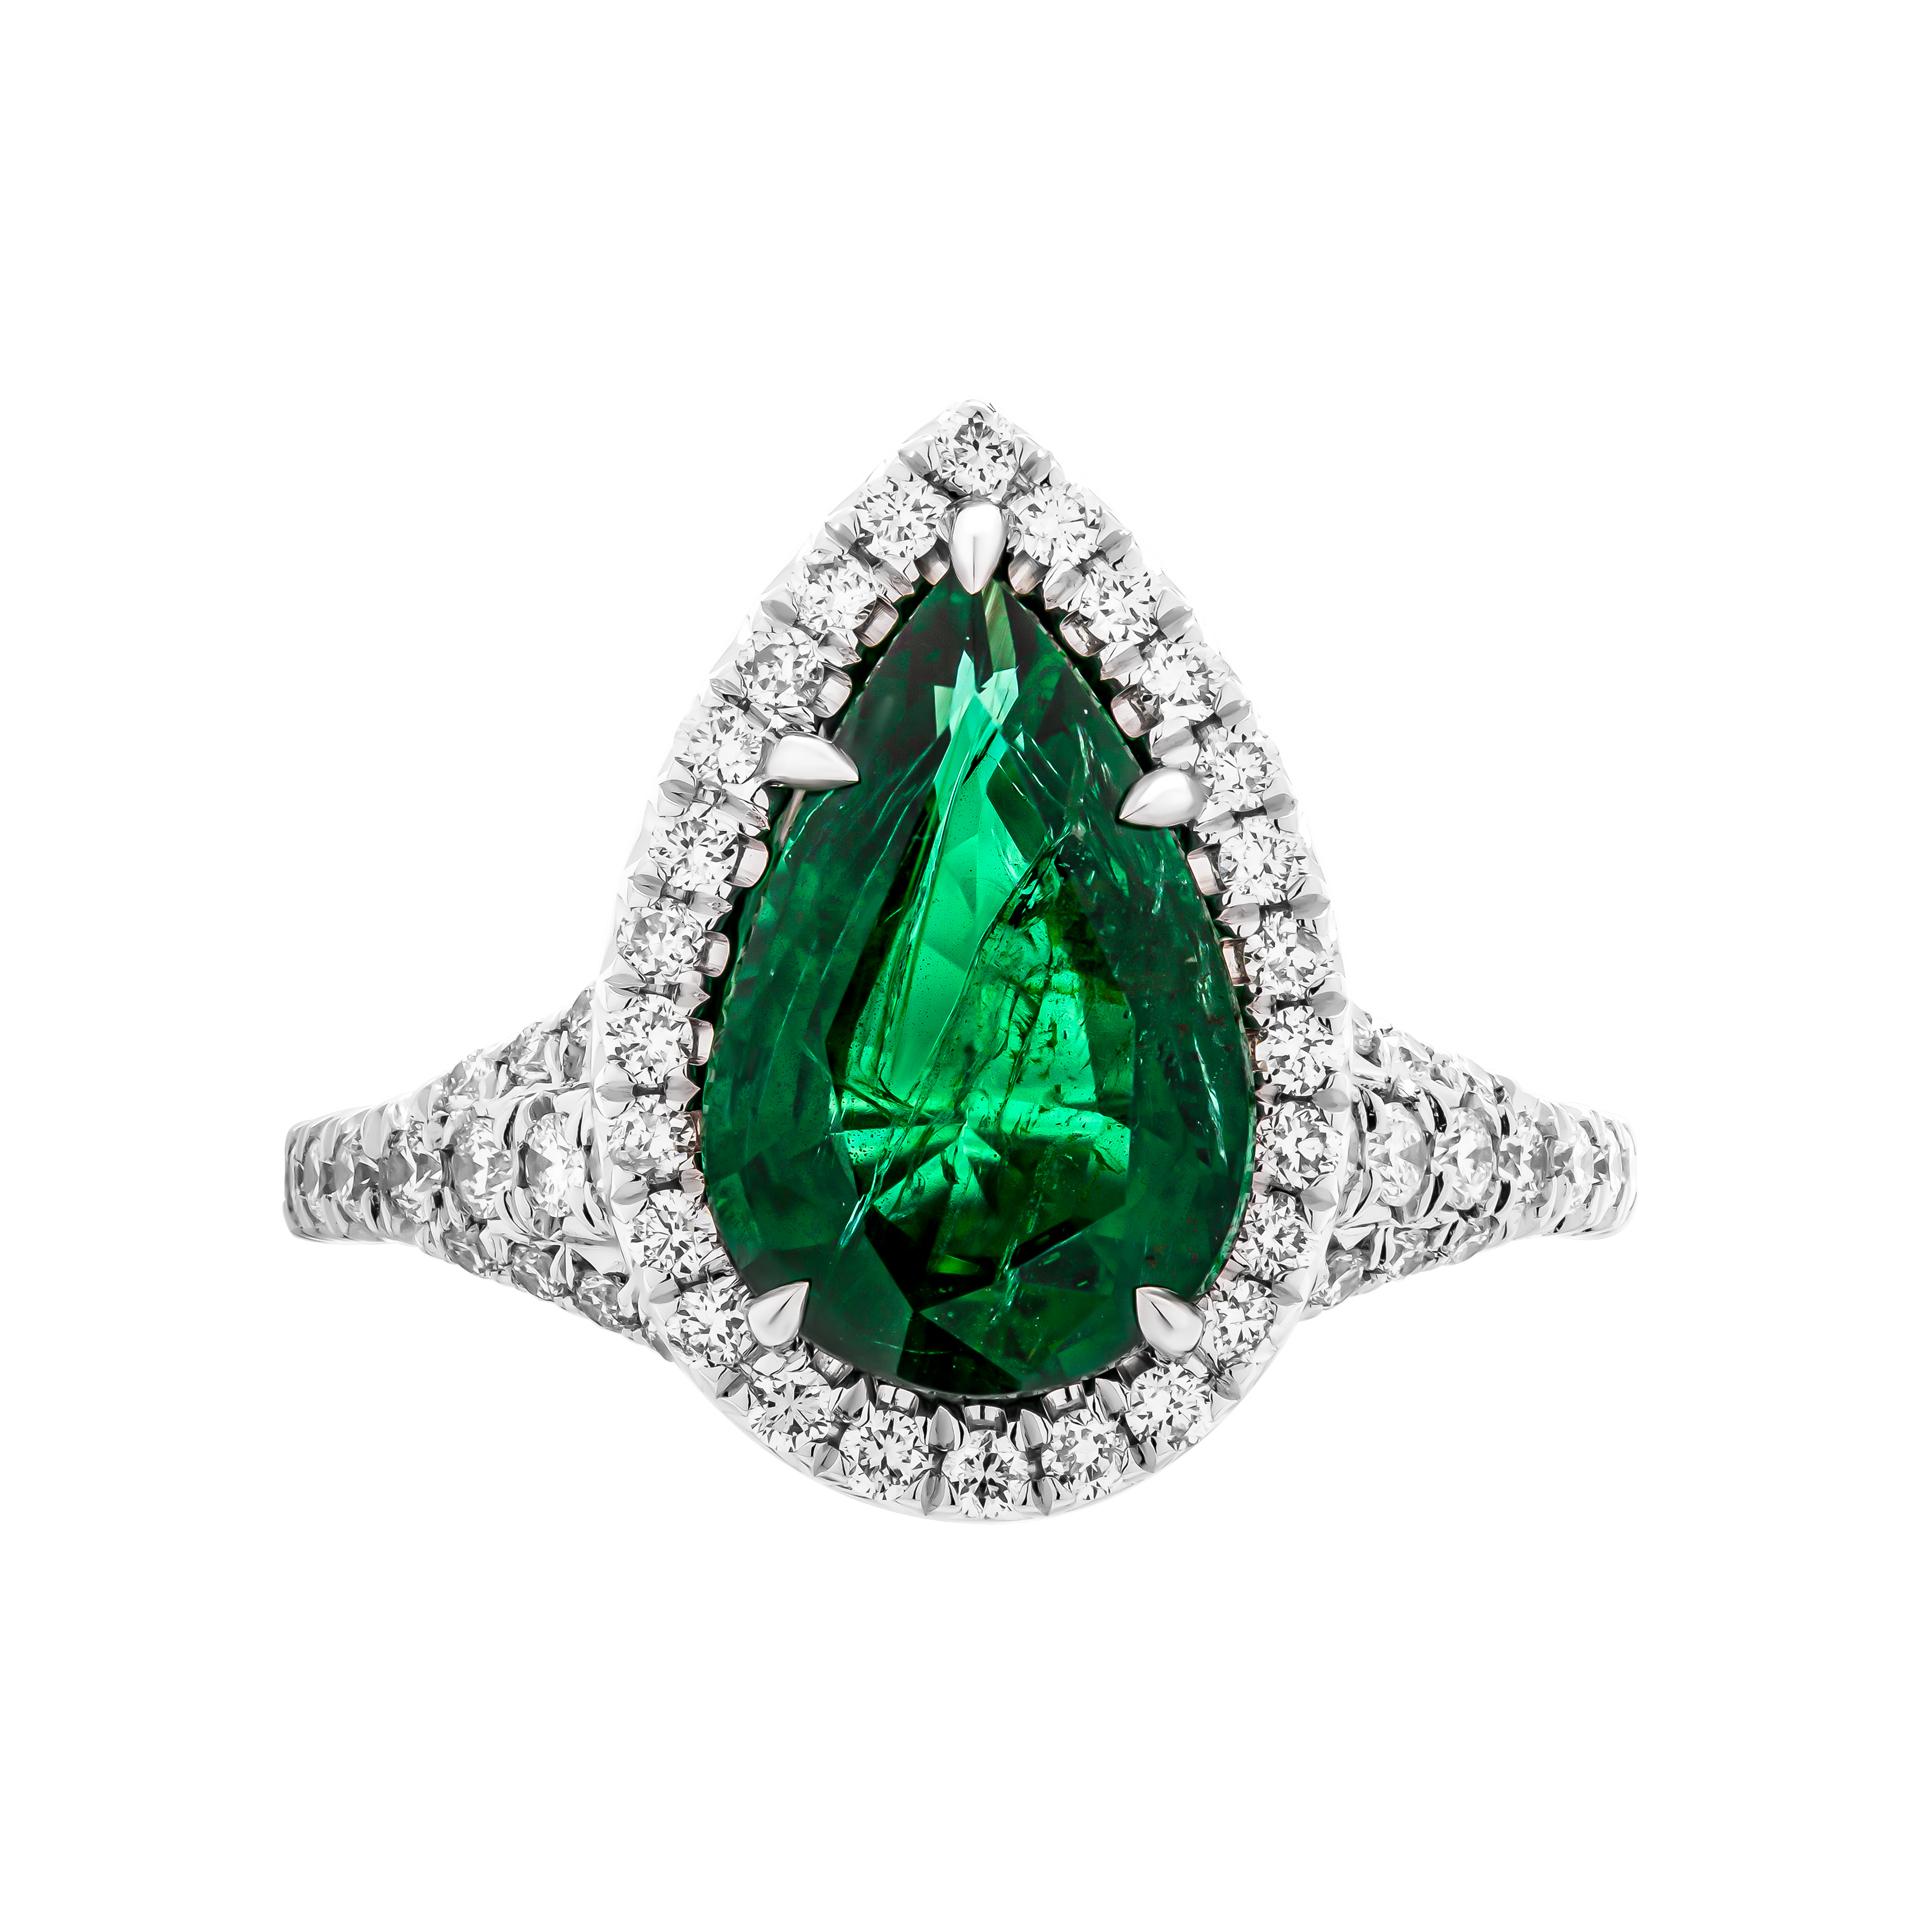  Ring in Platinum
With diamond shank: 3 ways split at the top & Diamond Halo around for pear shape: 2.16ct Green Emerald
 Total carat weight pave: 0,93ct 
size: 5.75